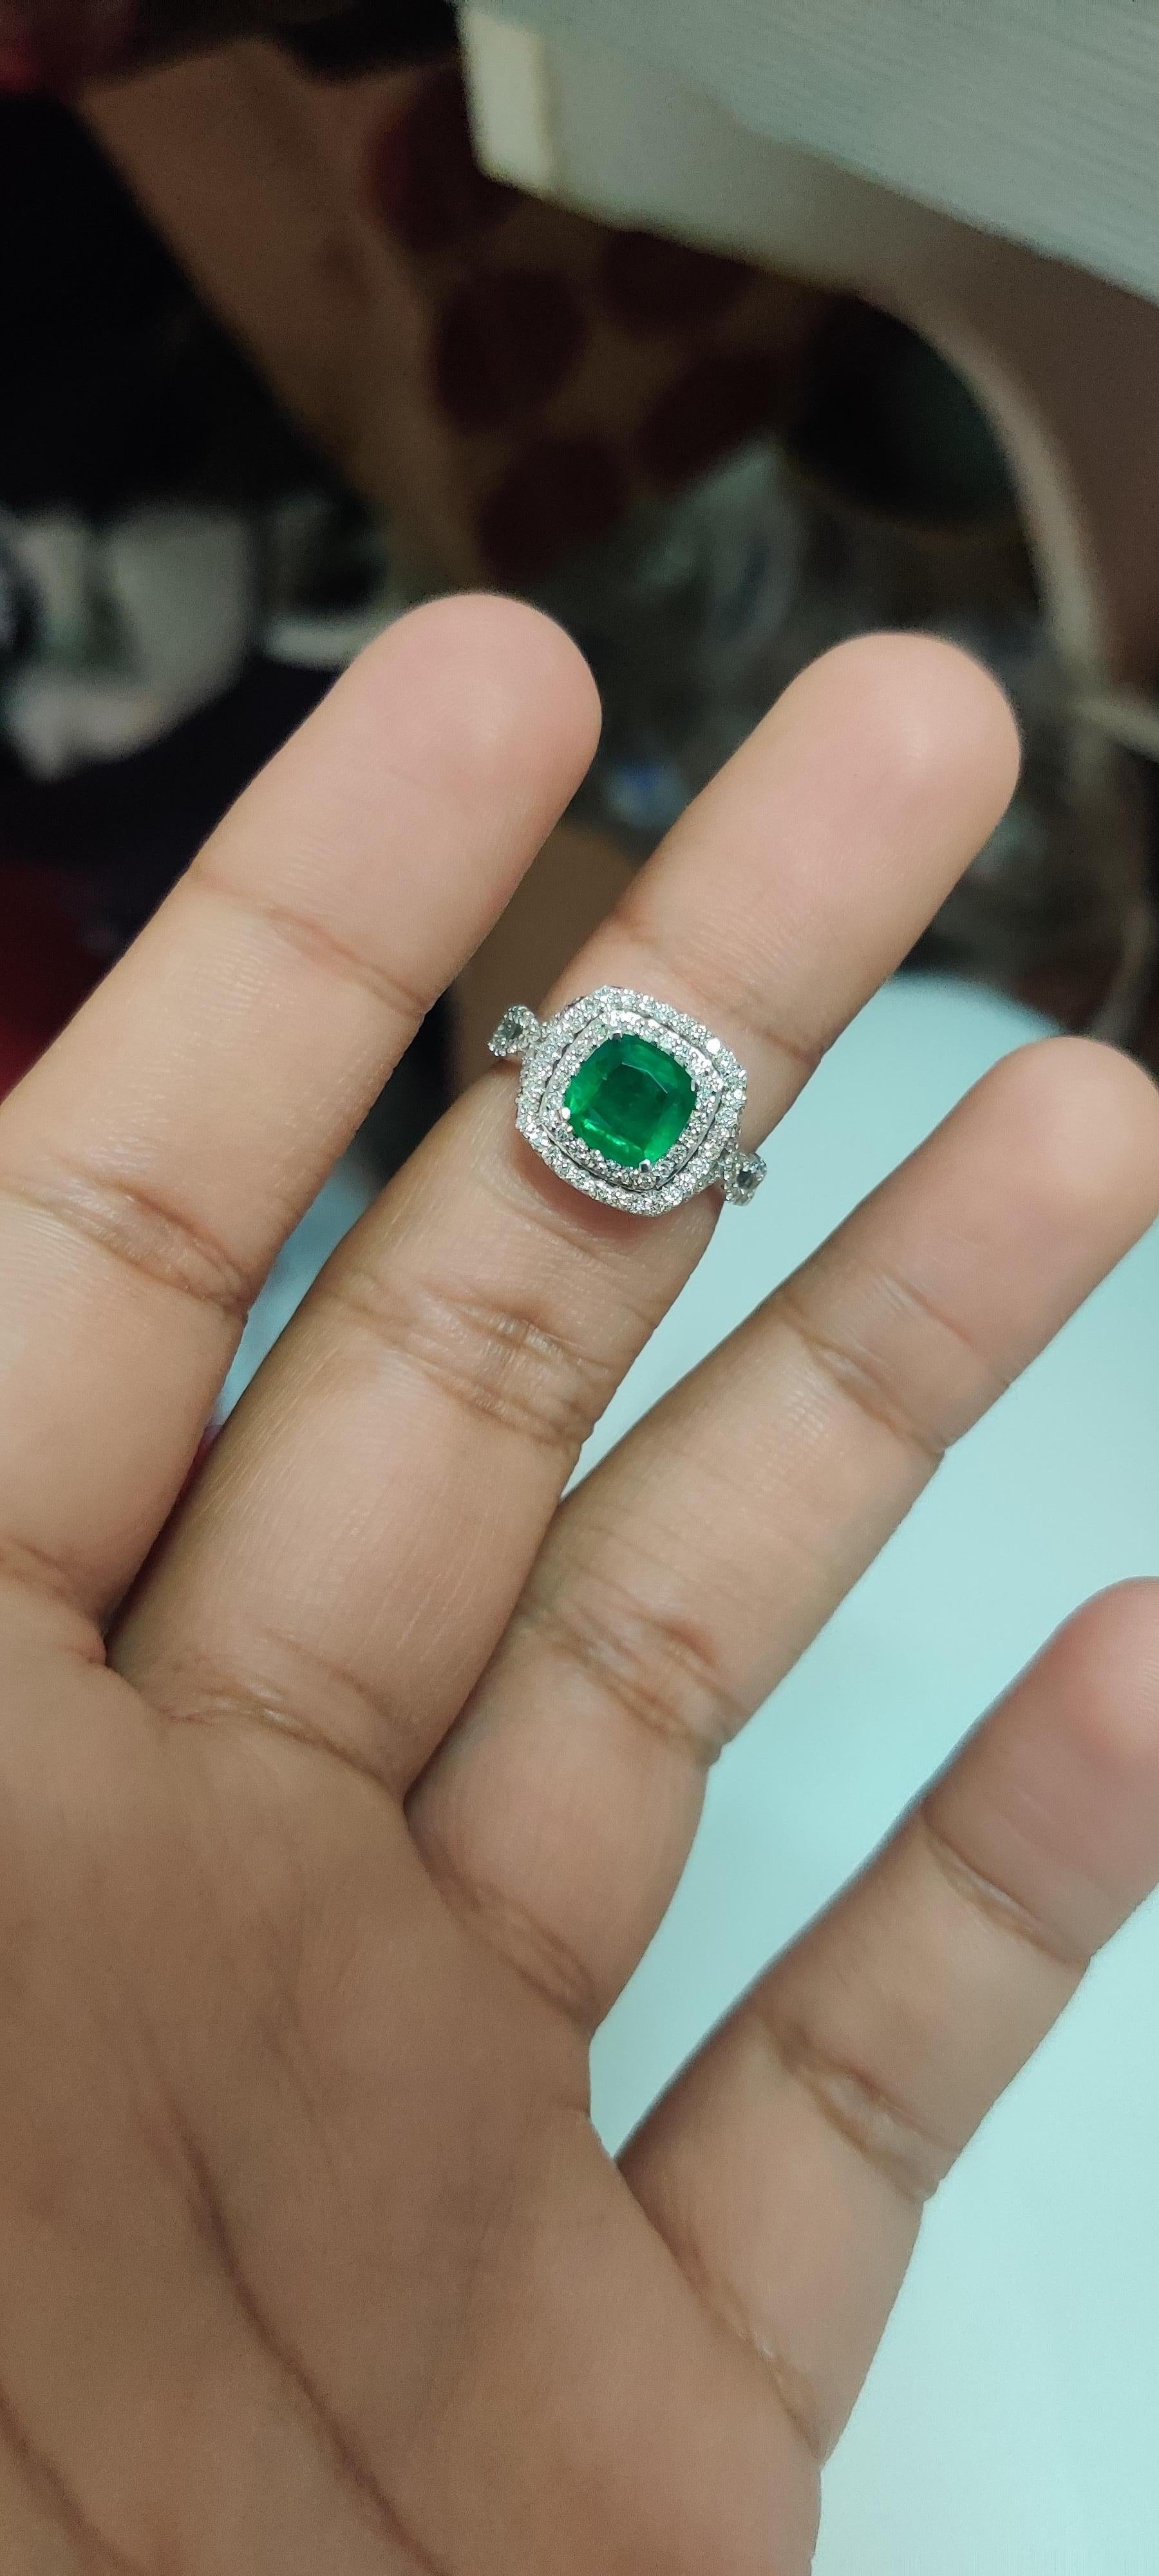 1.26 Carat Emerald with Halo Diamonds 18K White Gold Ring For Sale 4